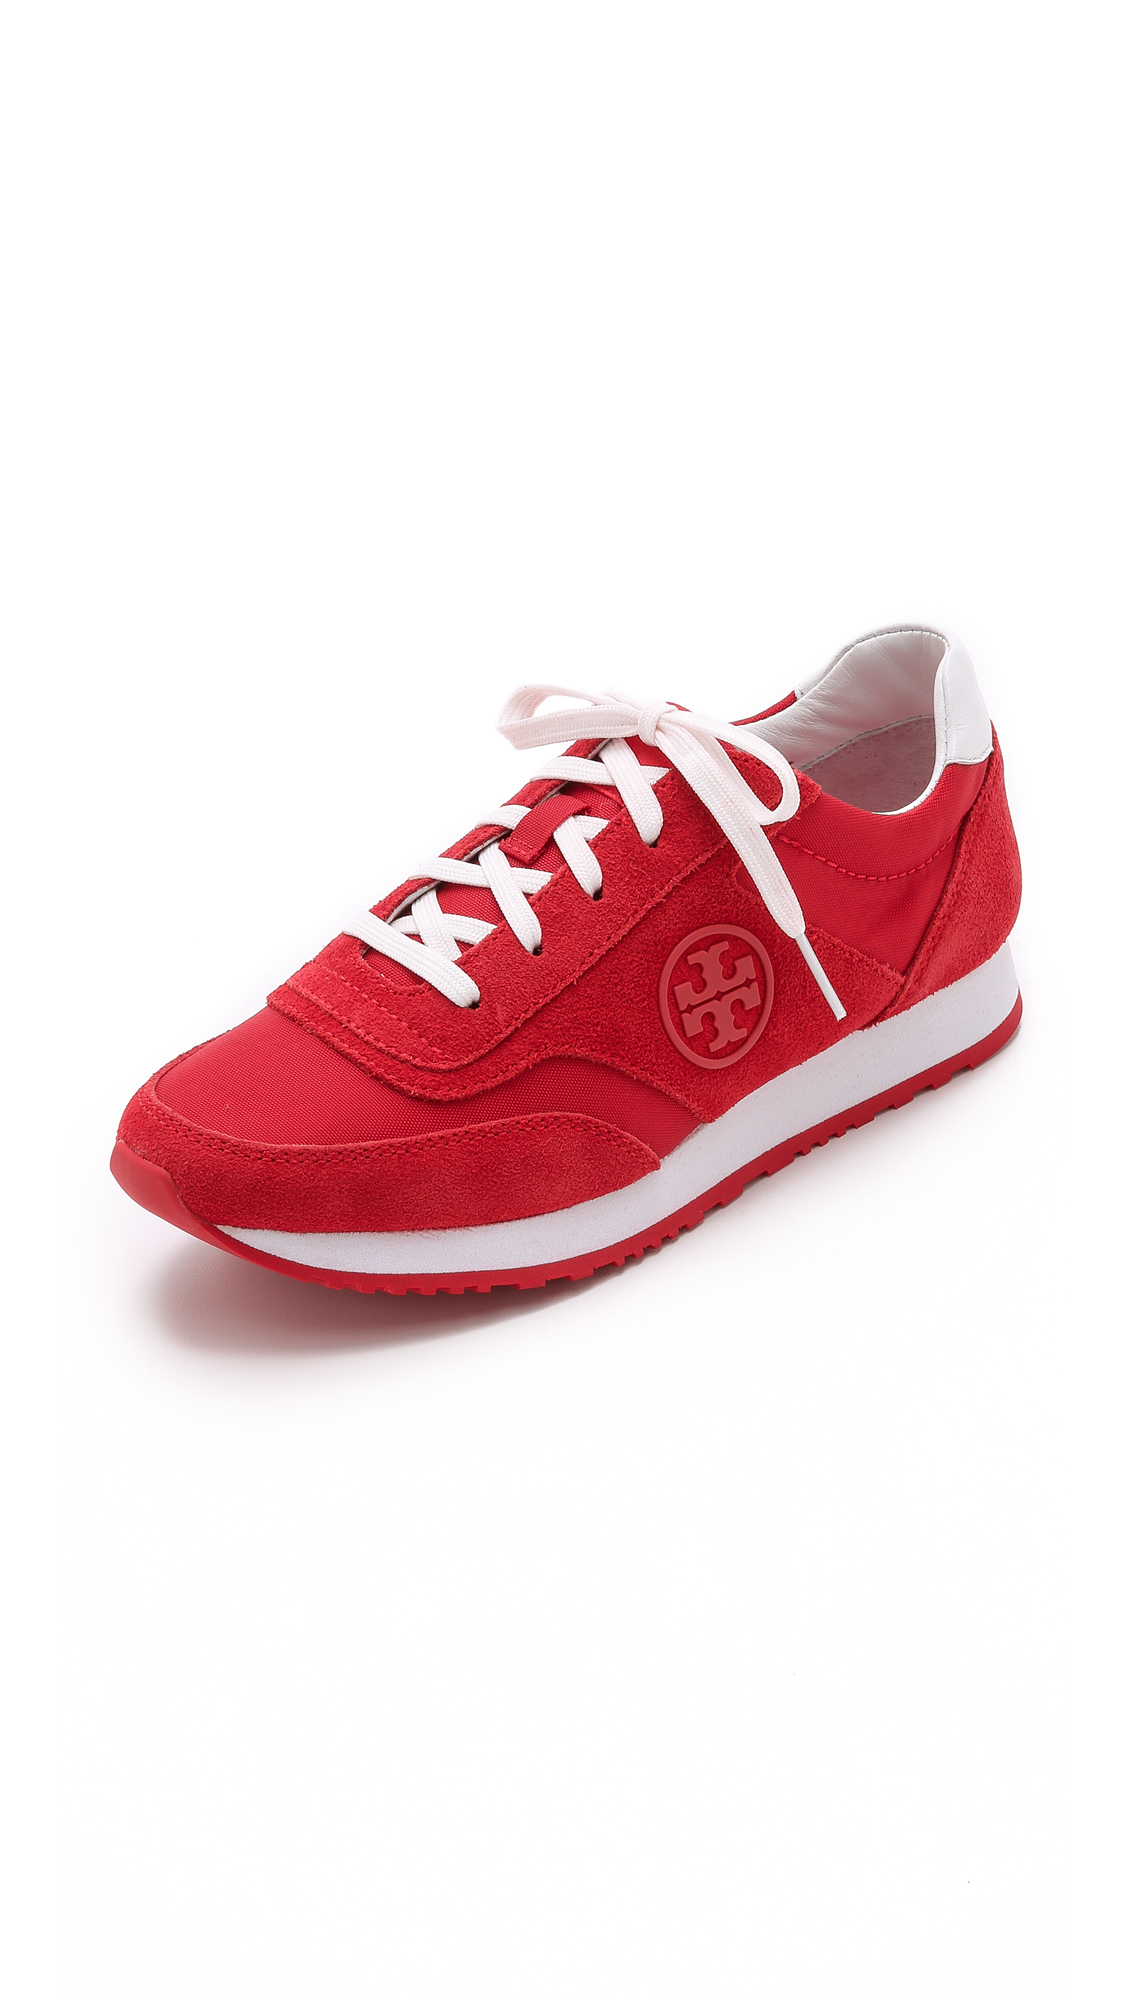 Tory Burch Rubber Logo Suede Trainer Sneakers - Masai Red - Lyst